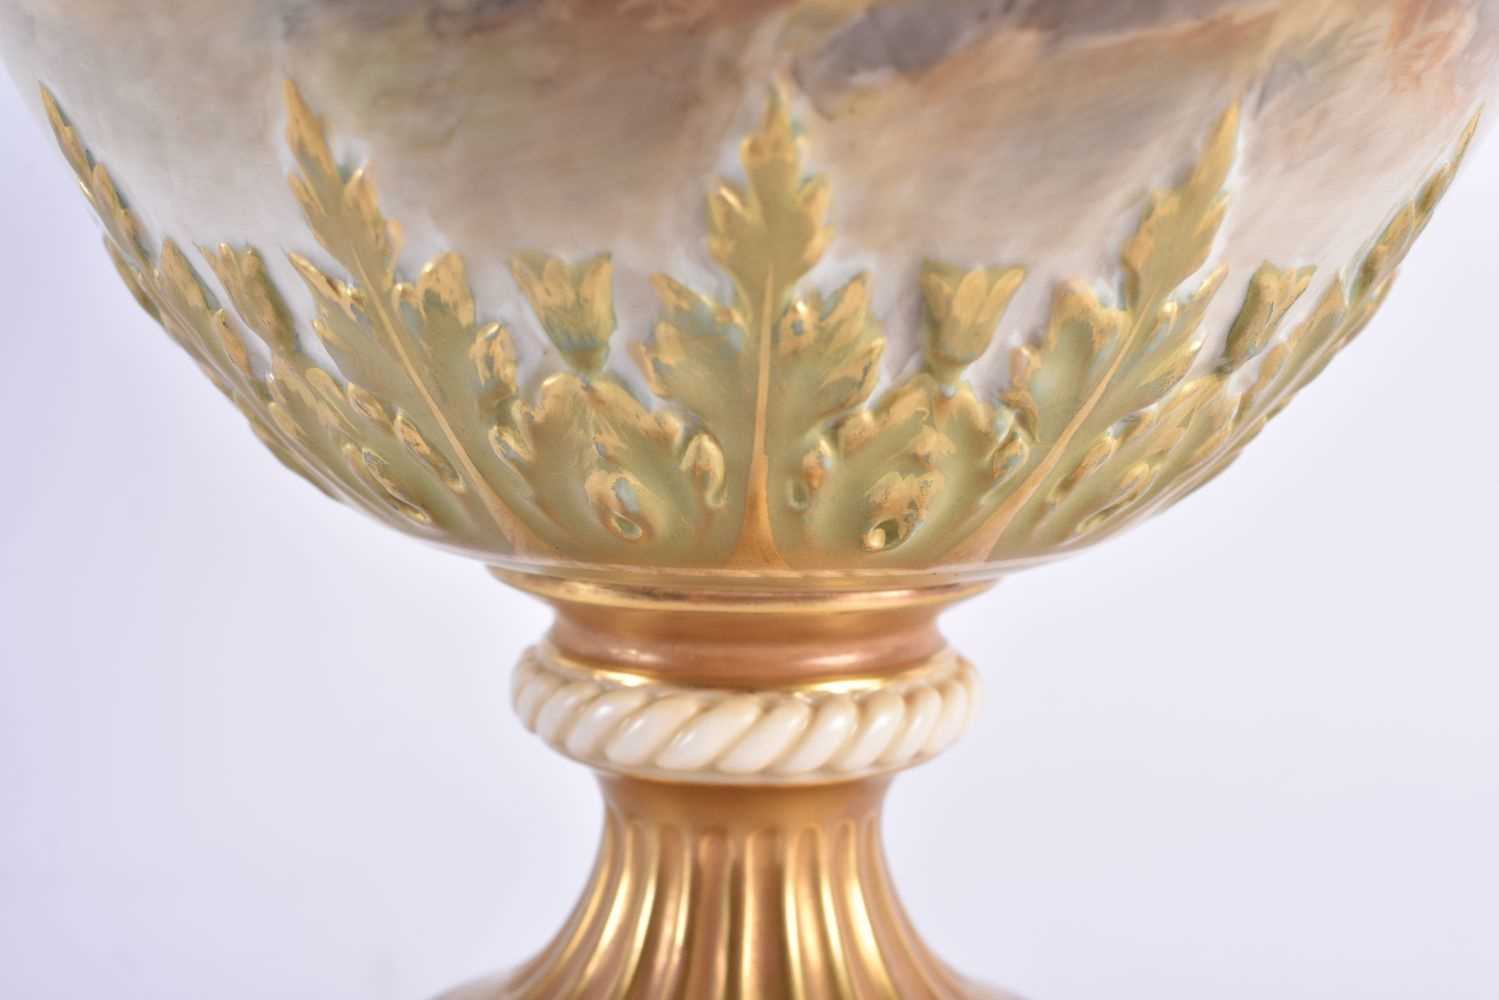 A FINE LARGE ROYAL WORCESTER PORCELAIN TWIN HANDLED VASE AND COVER by John Stinton, painted with two - Image 3 of 15